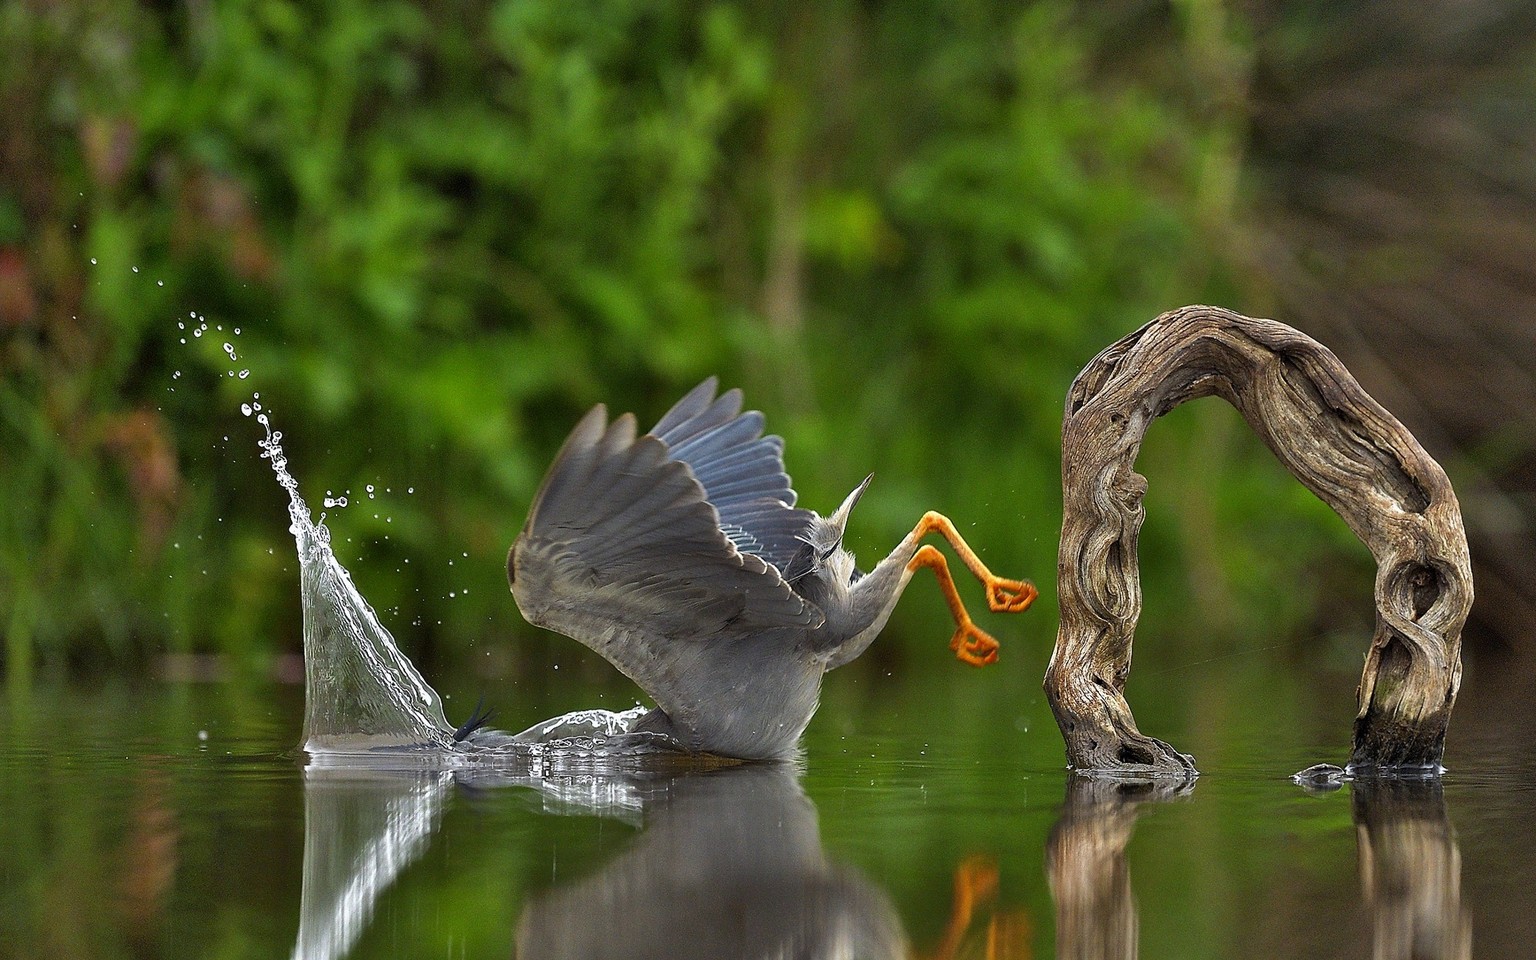 The Comedy Wildlife Photography Awards 2023
Vittorio Ricci
Genova
Italy

Title: Unexpected plunge
Description: An unusual and almost miserable end of a perfect moment, previously prepared, for a succe ...